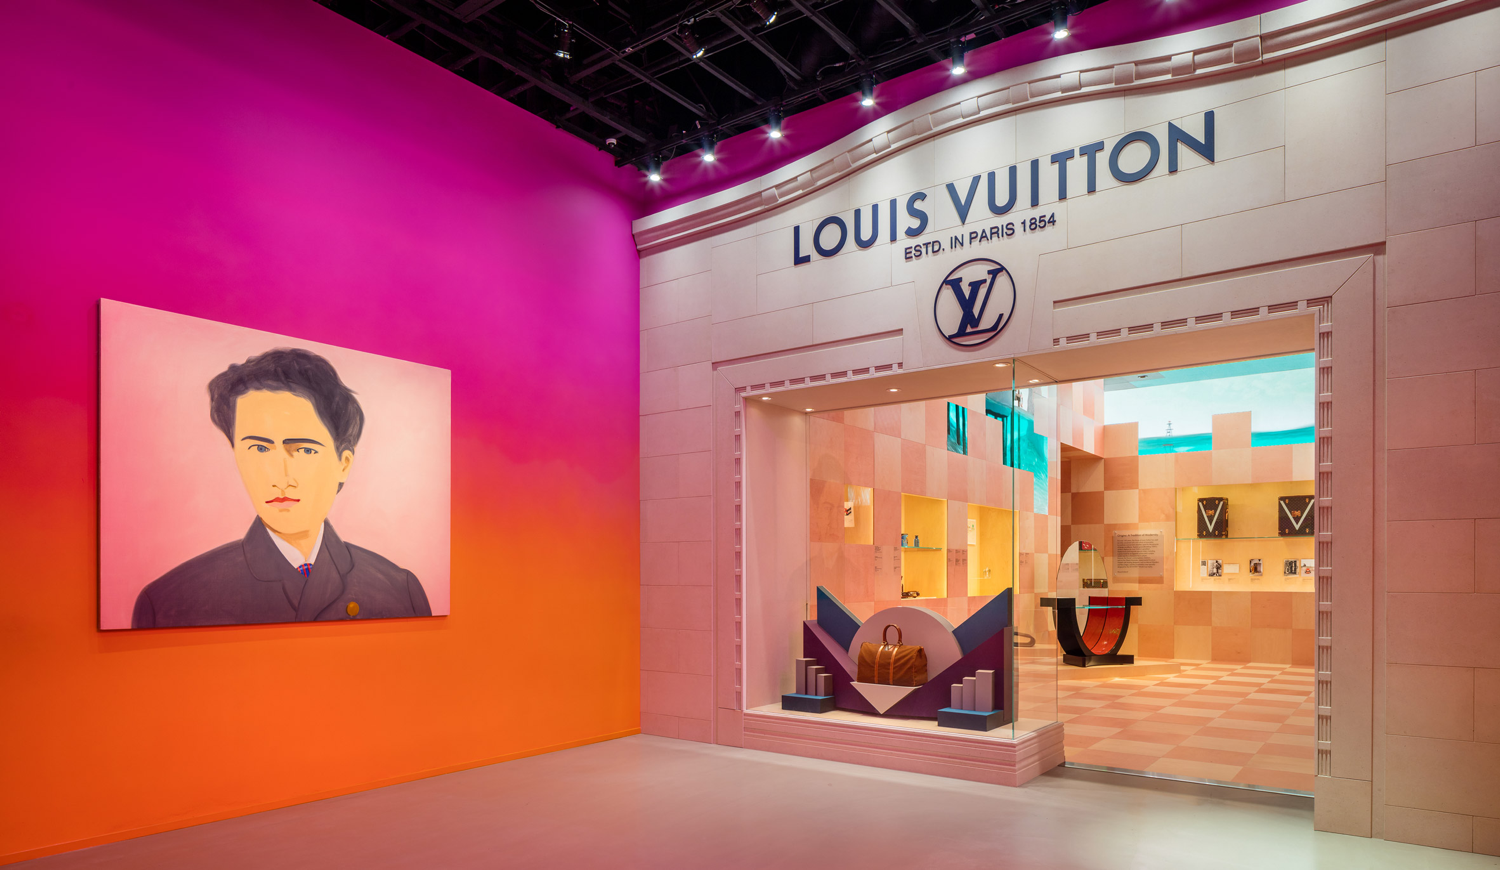 Louis Vuitton on X: #TschabalalaSelf brings her vision to the